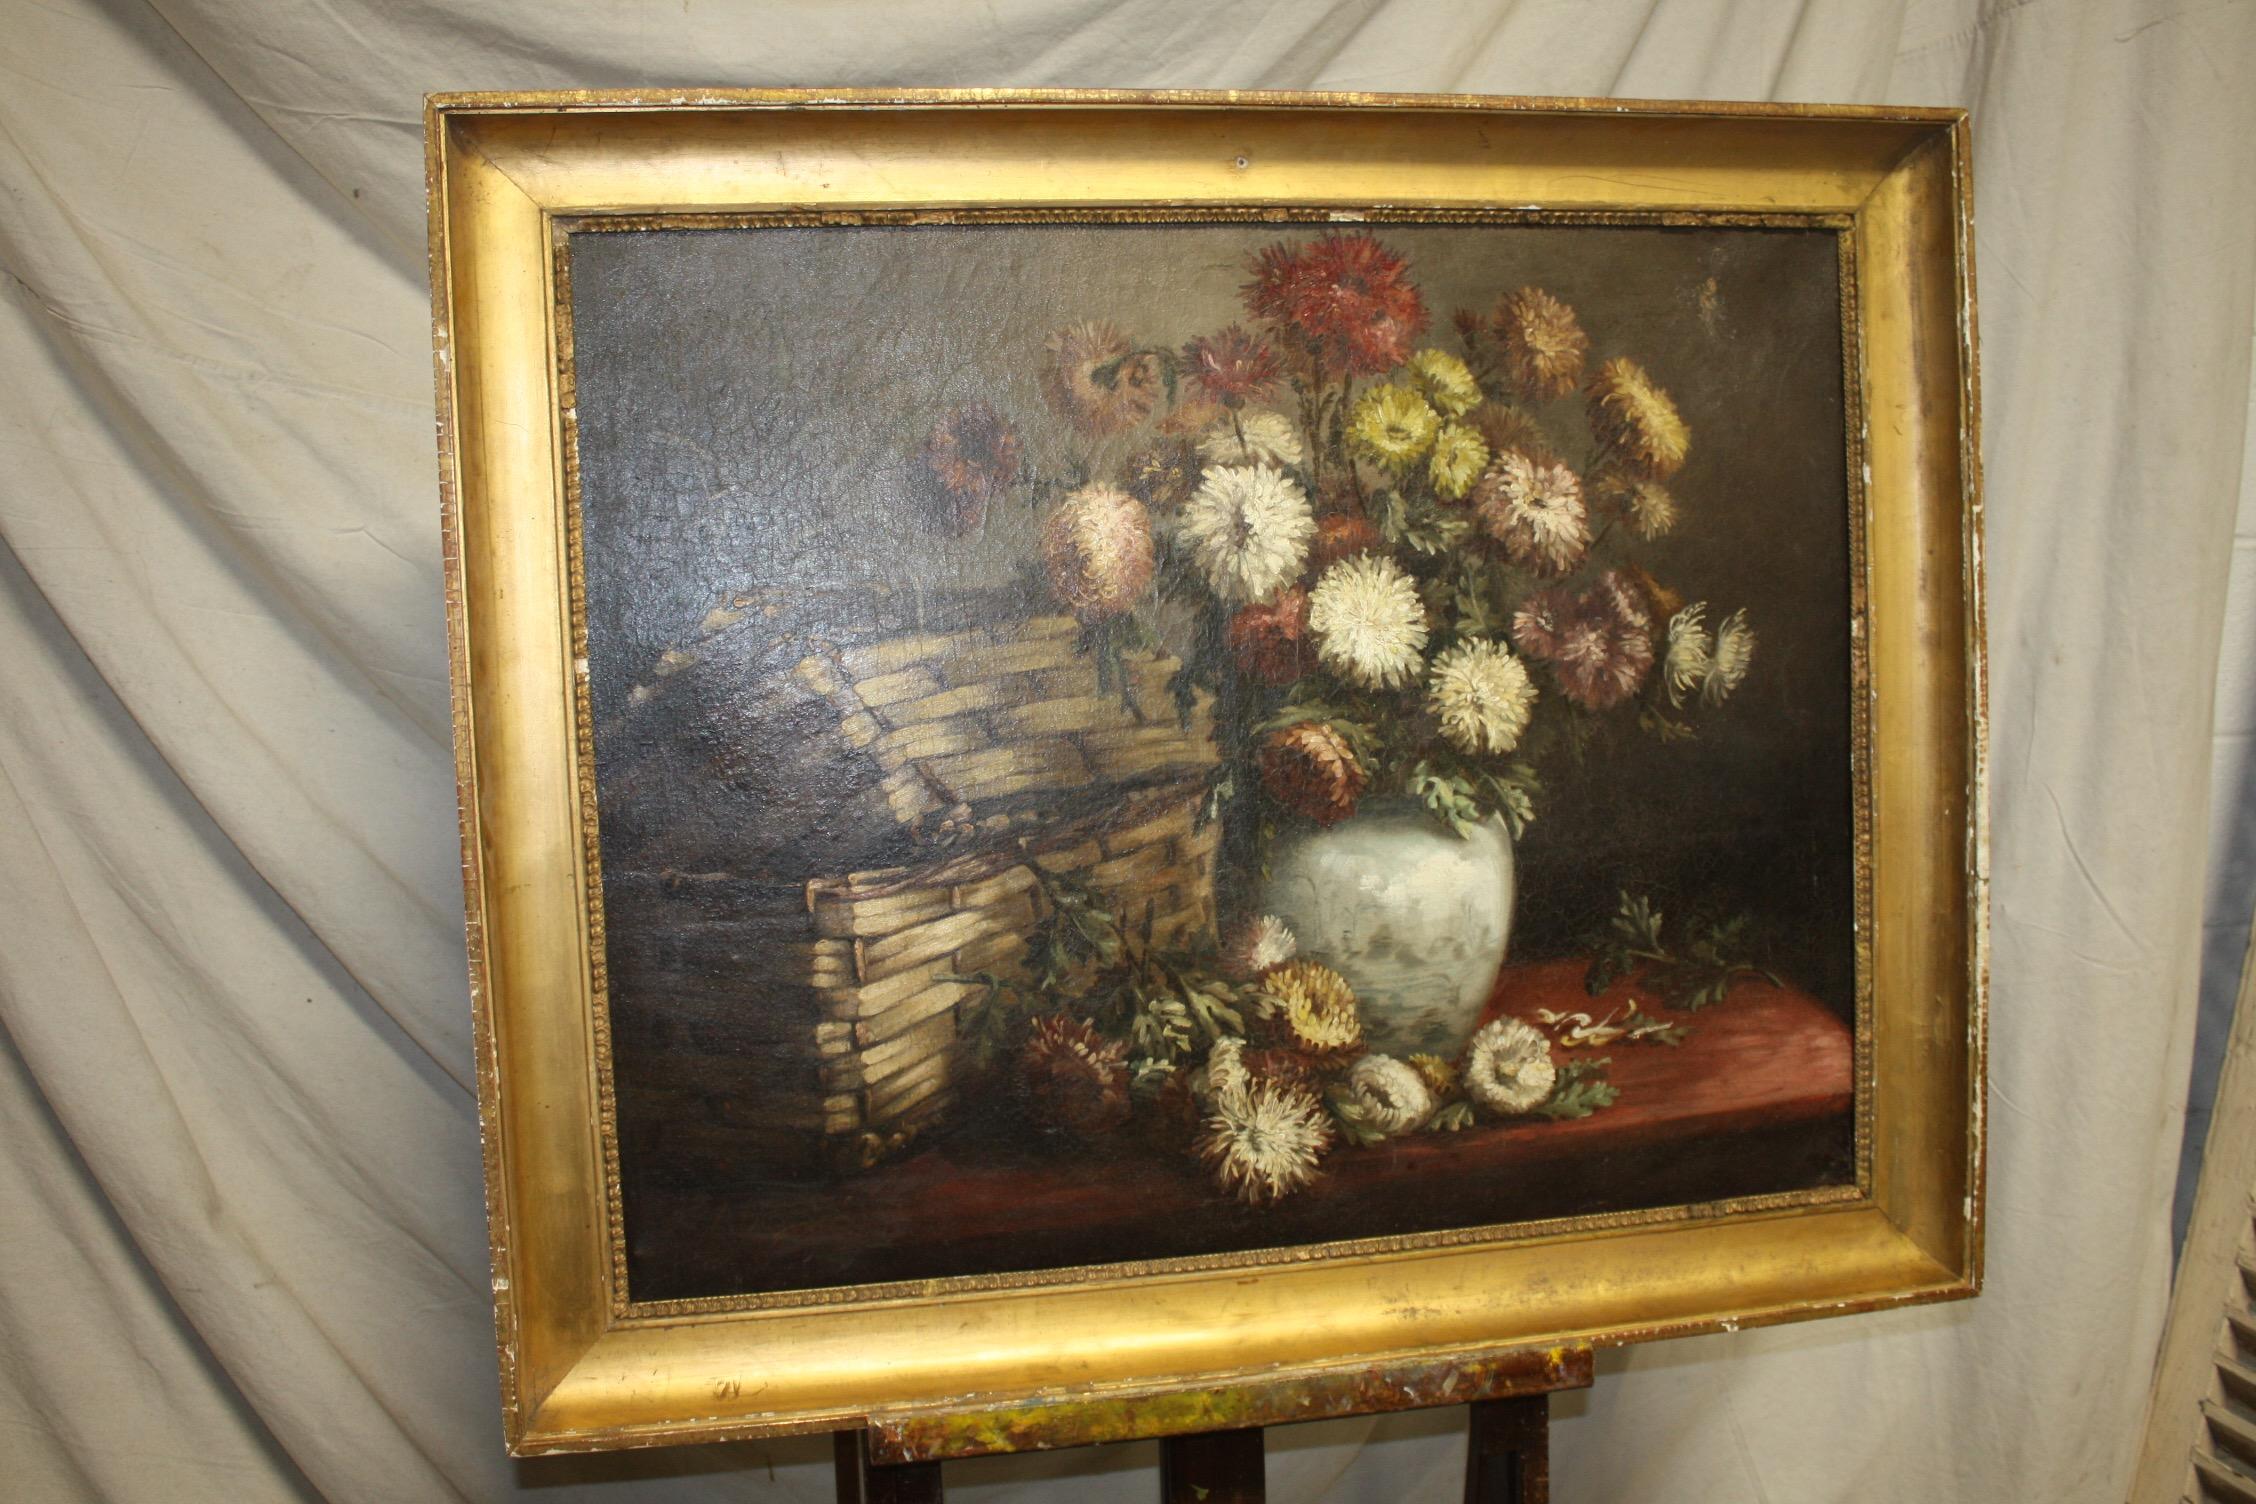 Beautiful 19th Century French Oil on Canvas In Good Condition For Sale In Stockbridge, GA